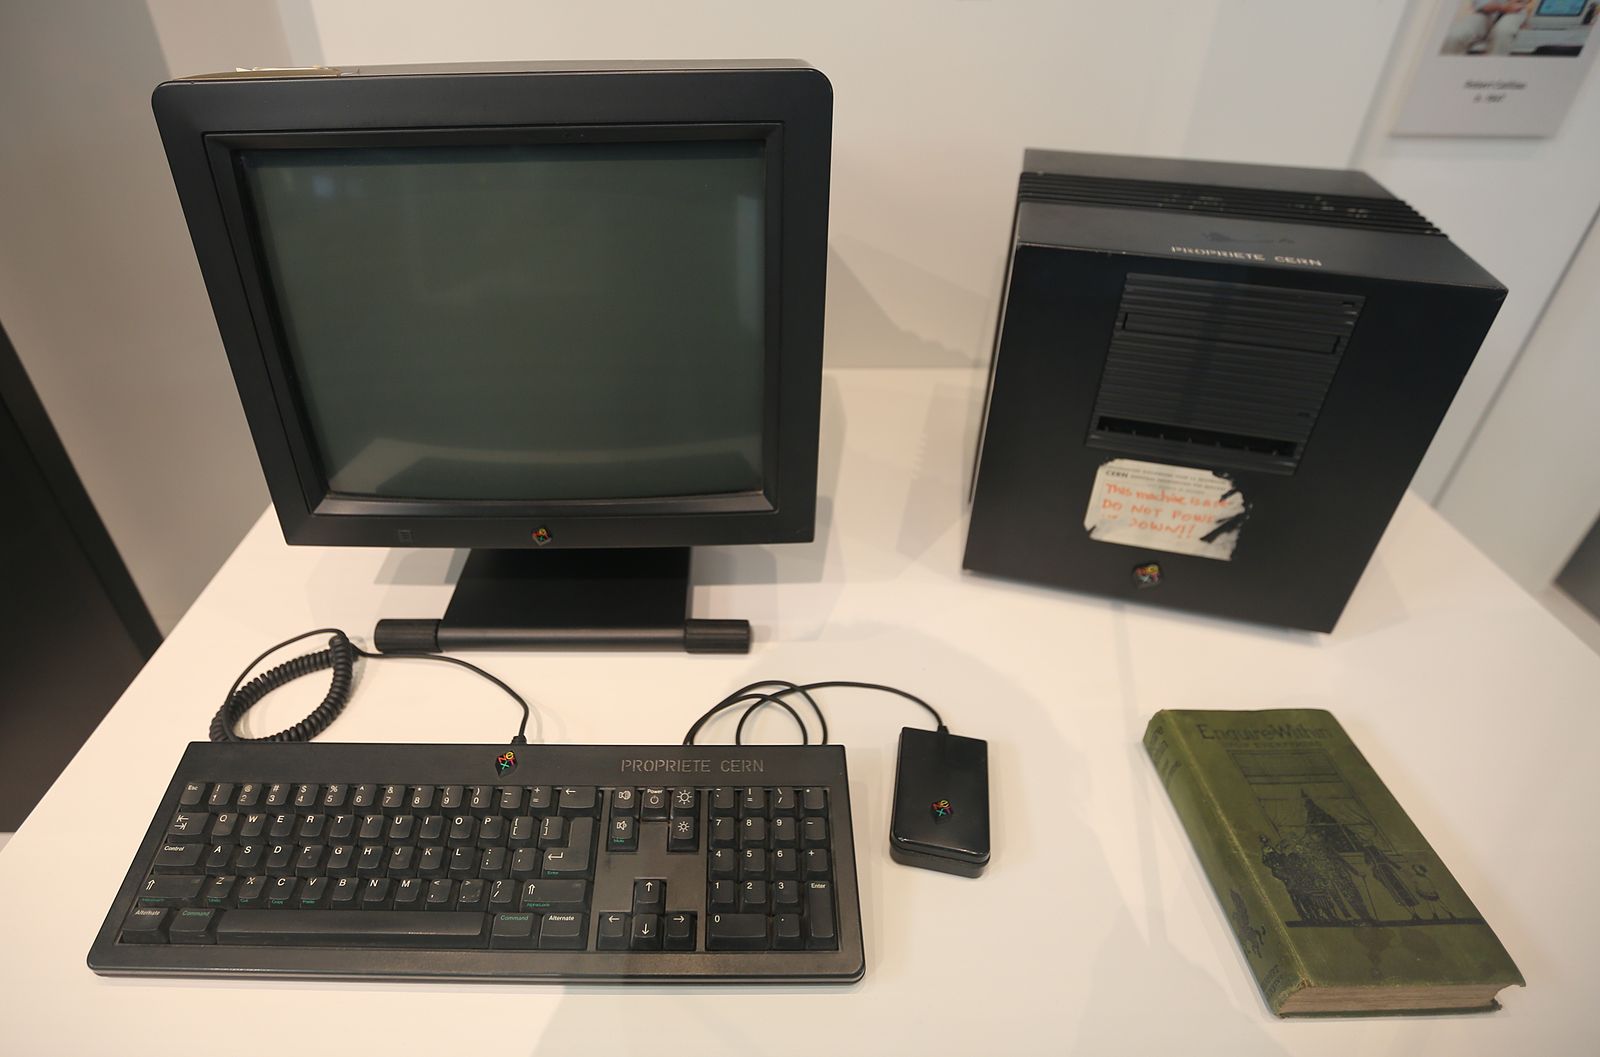 The first web server ever